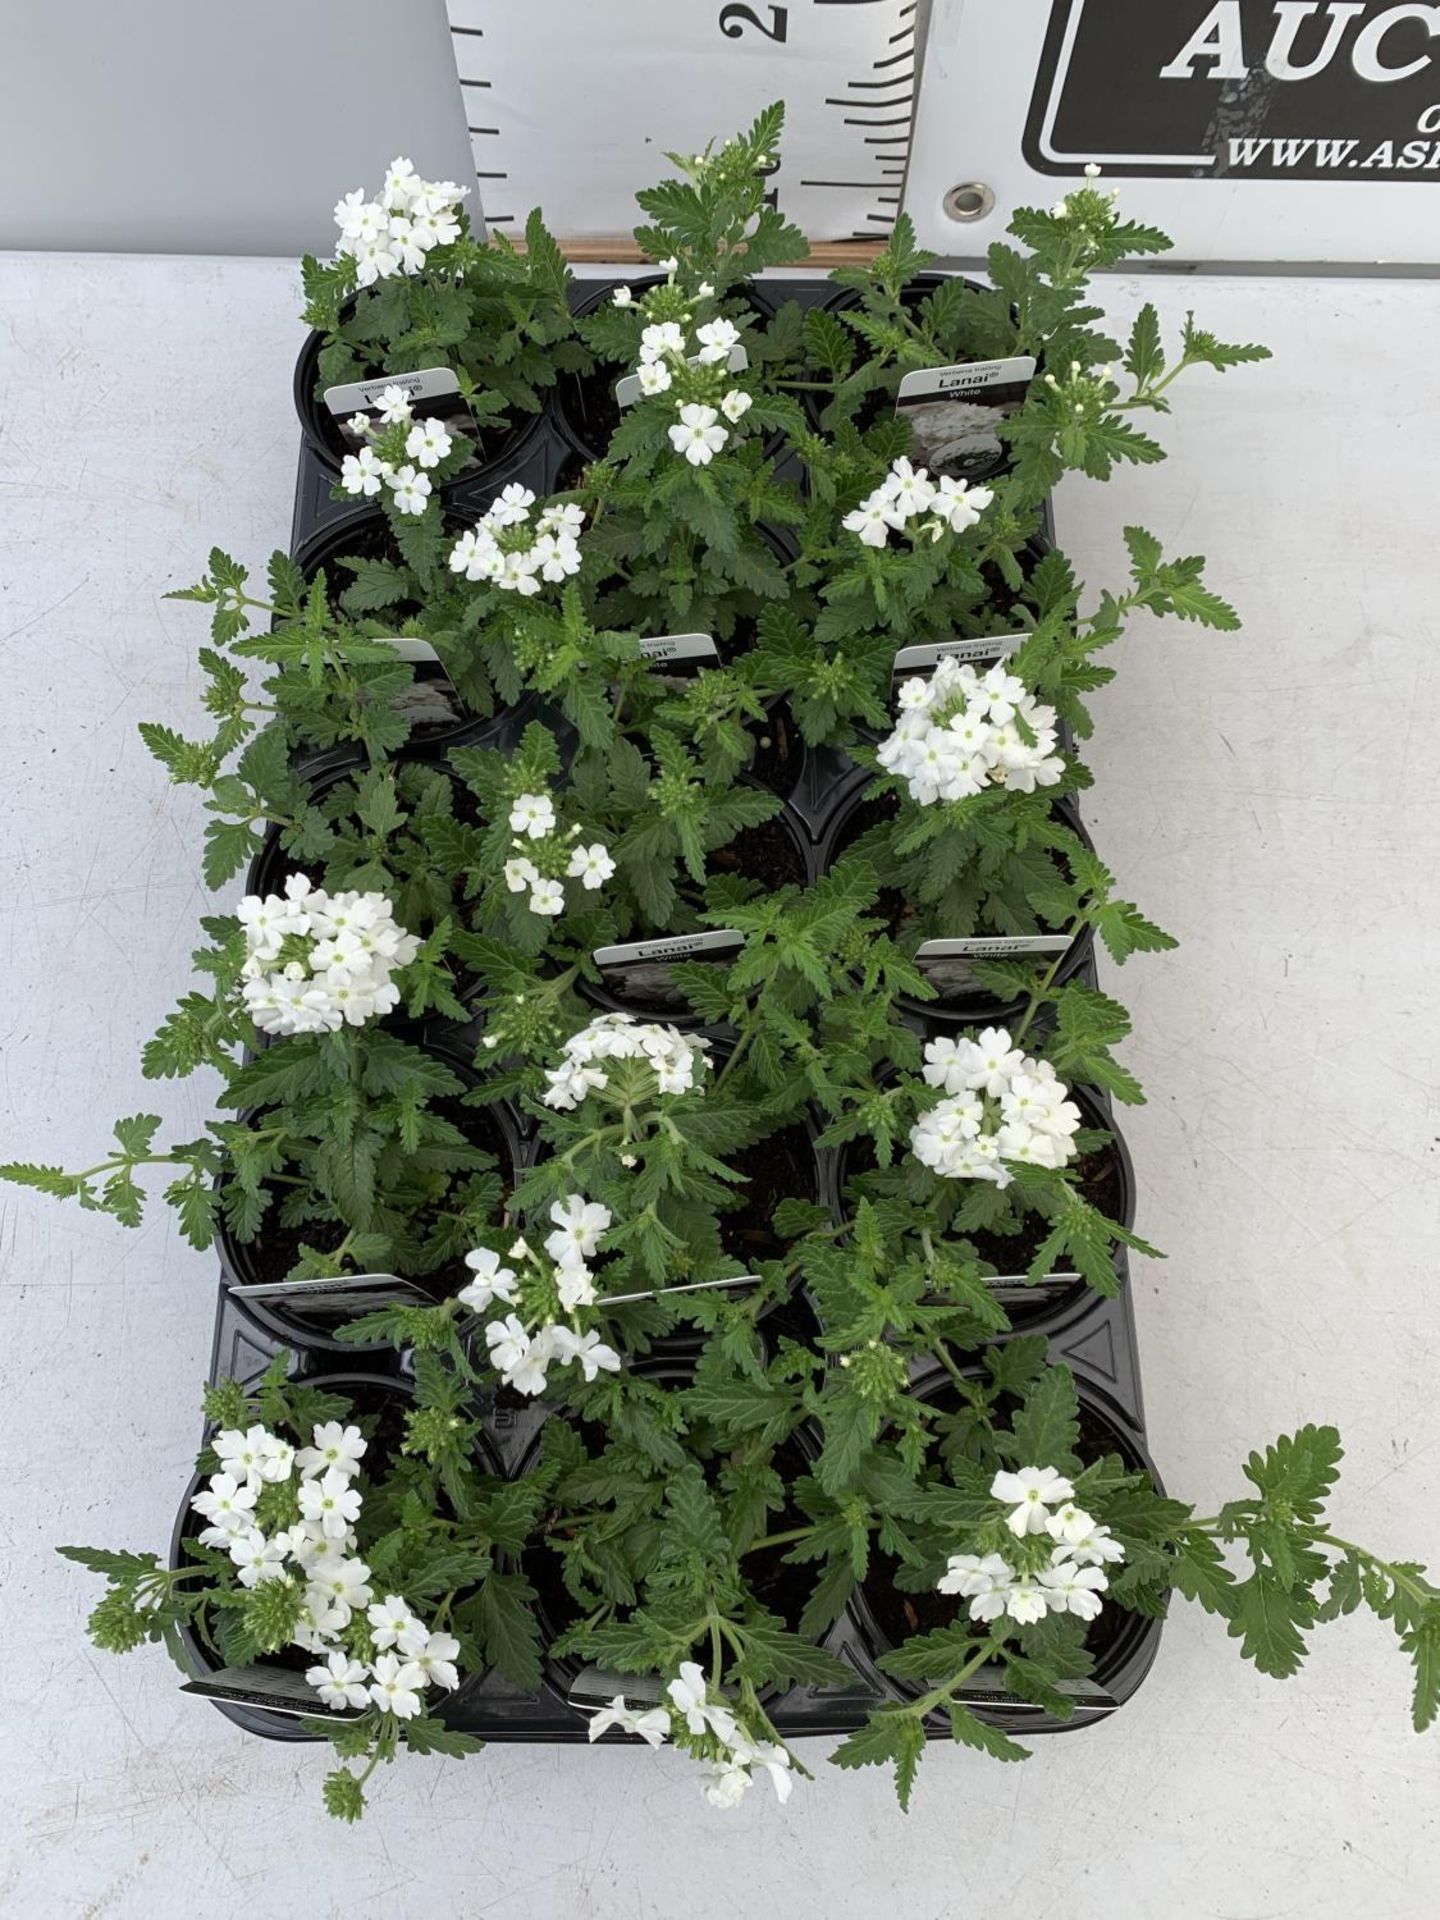 FIFTEEN TRAILING VERBENA LANAI IN WHITE BASKETS PLANTS ON A TRAY IN P9 POTS PLUS VAT TO BE SOLD - Image 2 of 4